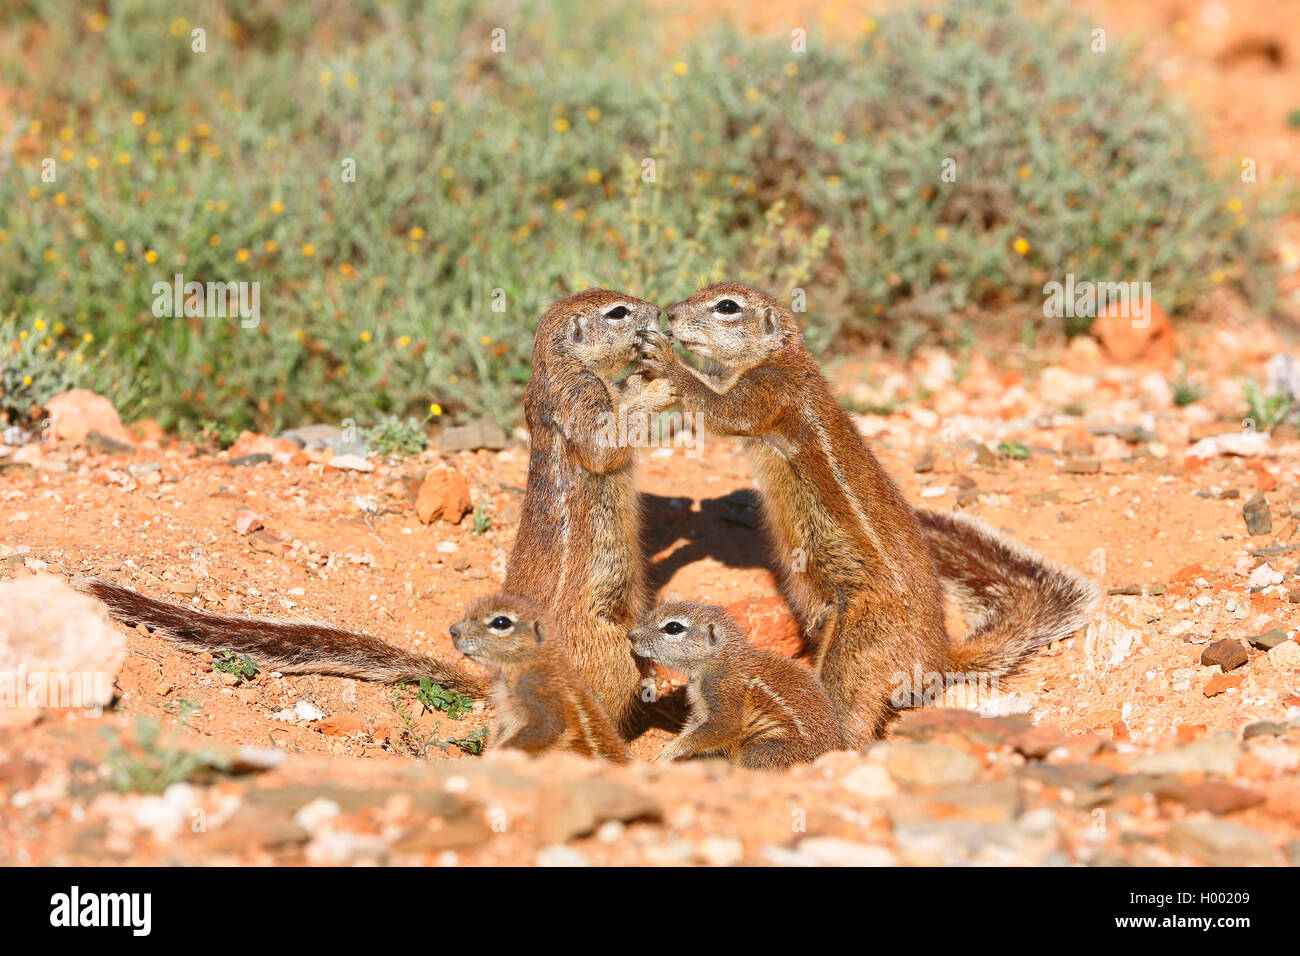 South African ground squirrel, Cape ground squirrel (Geosciurus inauris, Xerus inauris), family at the burrow, South Africa, Eastern Cape, Camdeboo National Park Stock Photo